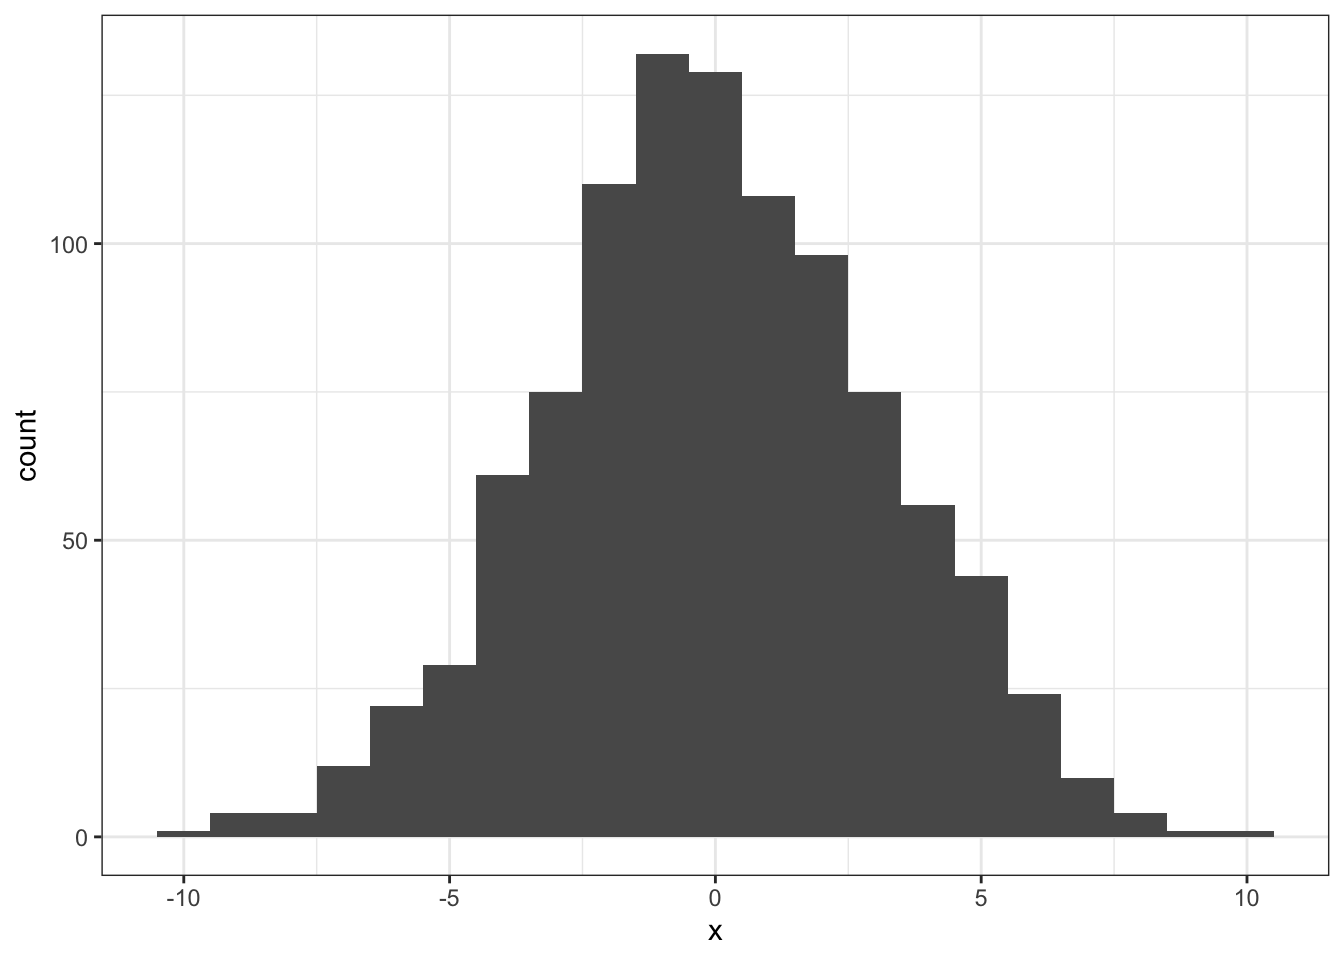 The simulated distribution of all possible differences